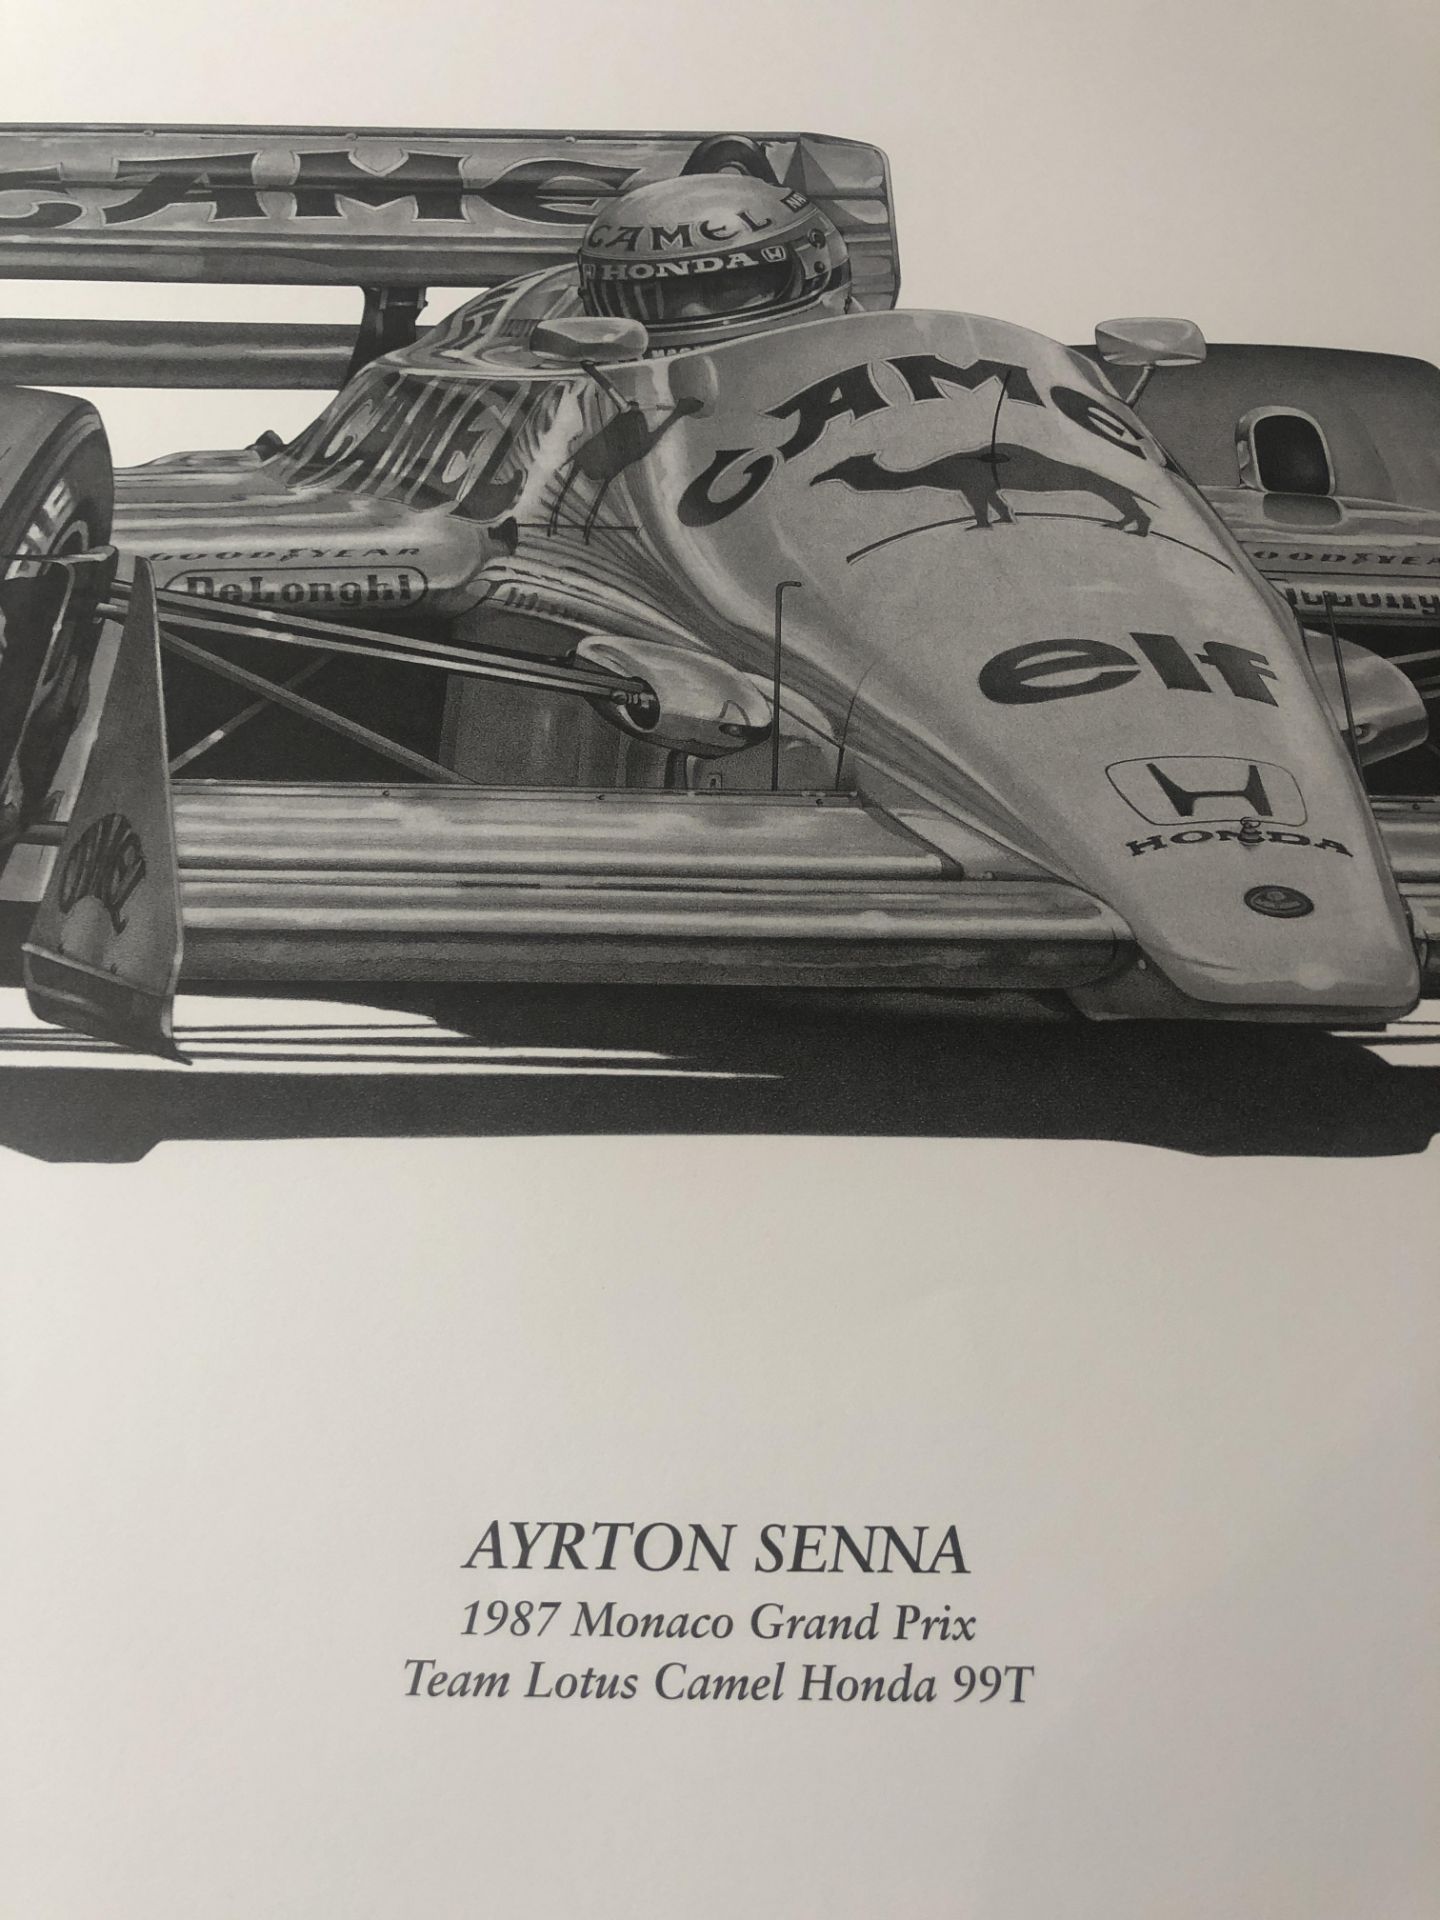 Alan Stammers Signed Limited Edition Print of Ayrton Senna - Image 2 of 4